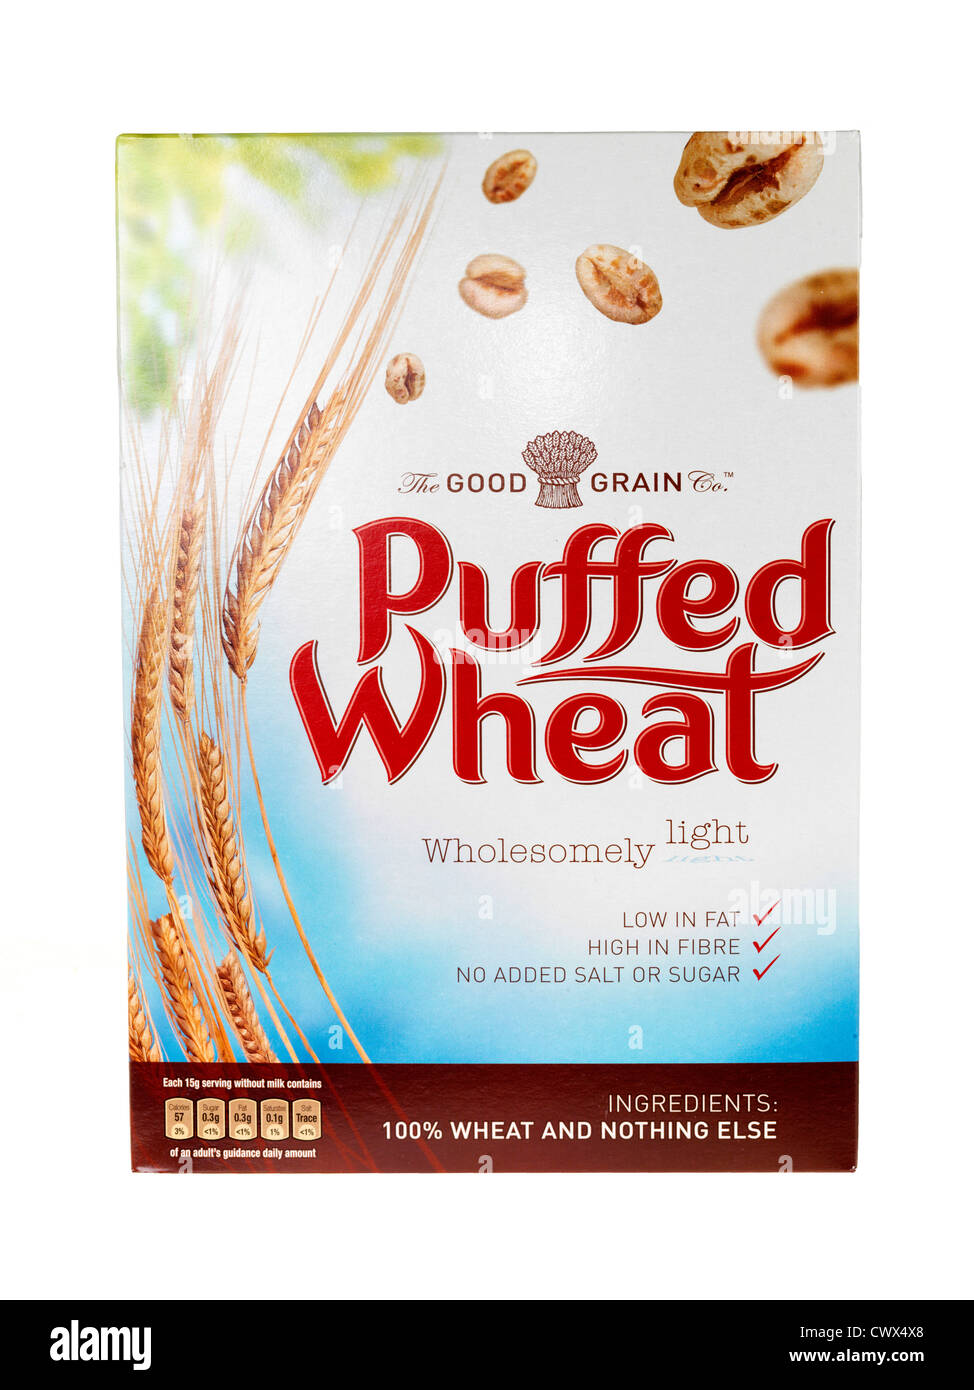 Puffed Wheat Breakfast Cereals Stock Photo